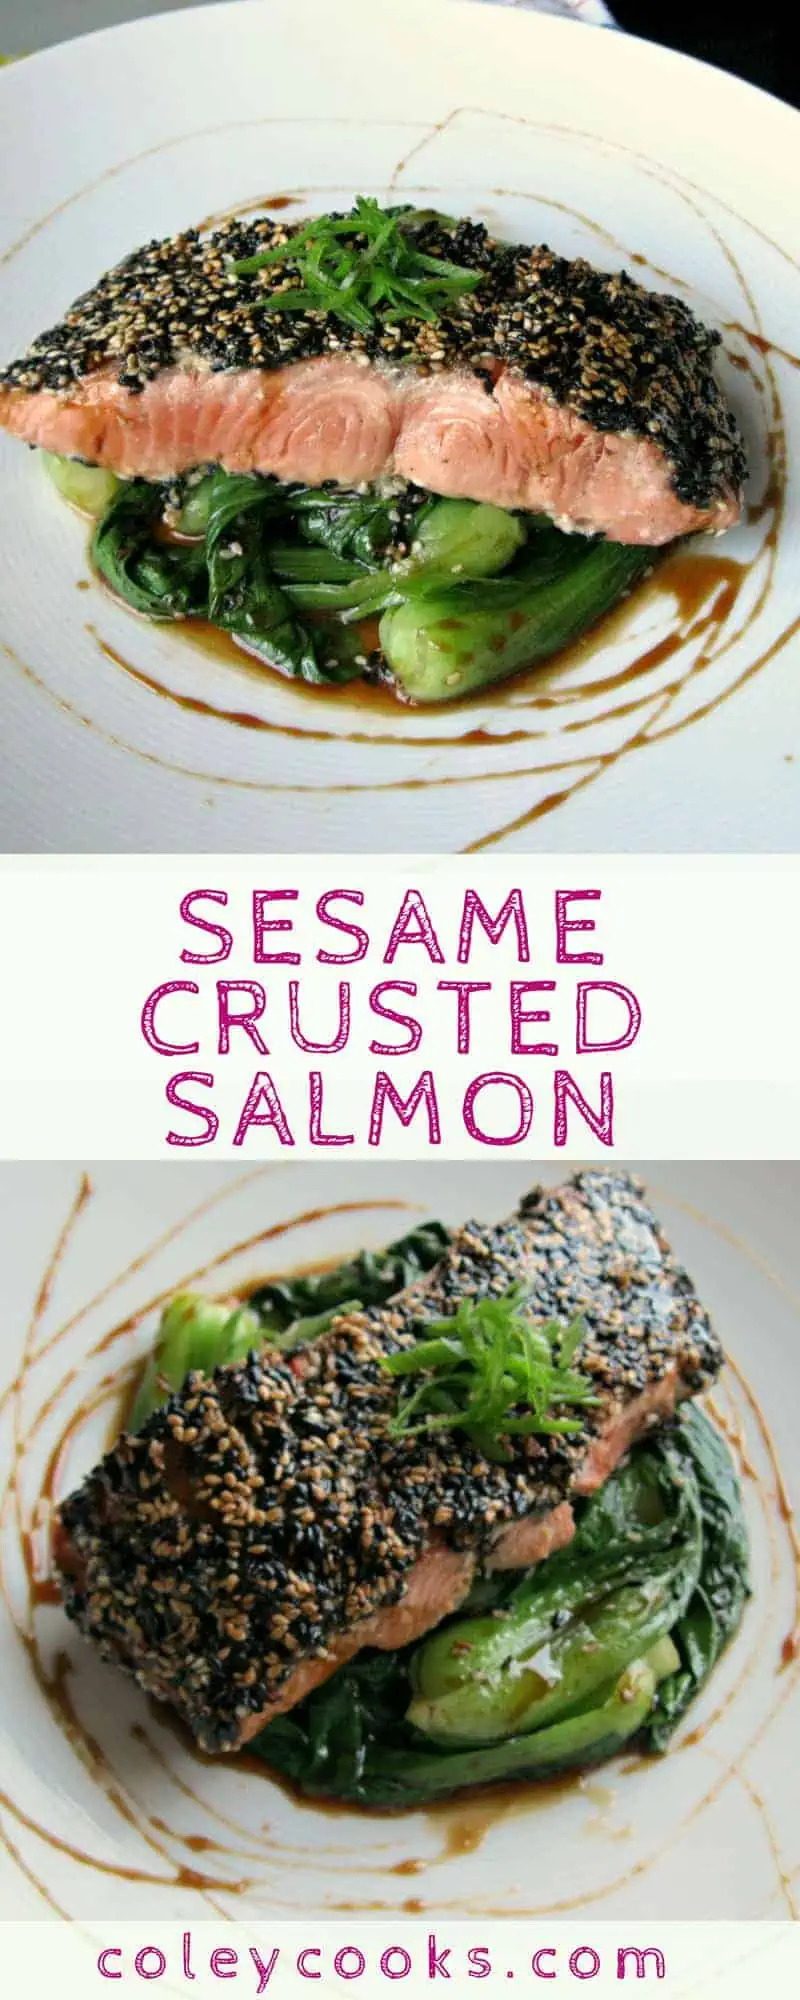 SESAME CRUSTED SALMON | Light and flavorful easy Asian salmon recipe with sweet soy glaze! #easy #salmon #recipe #seafood #fish | ColeyCooks.com